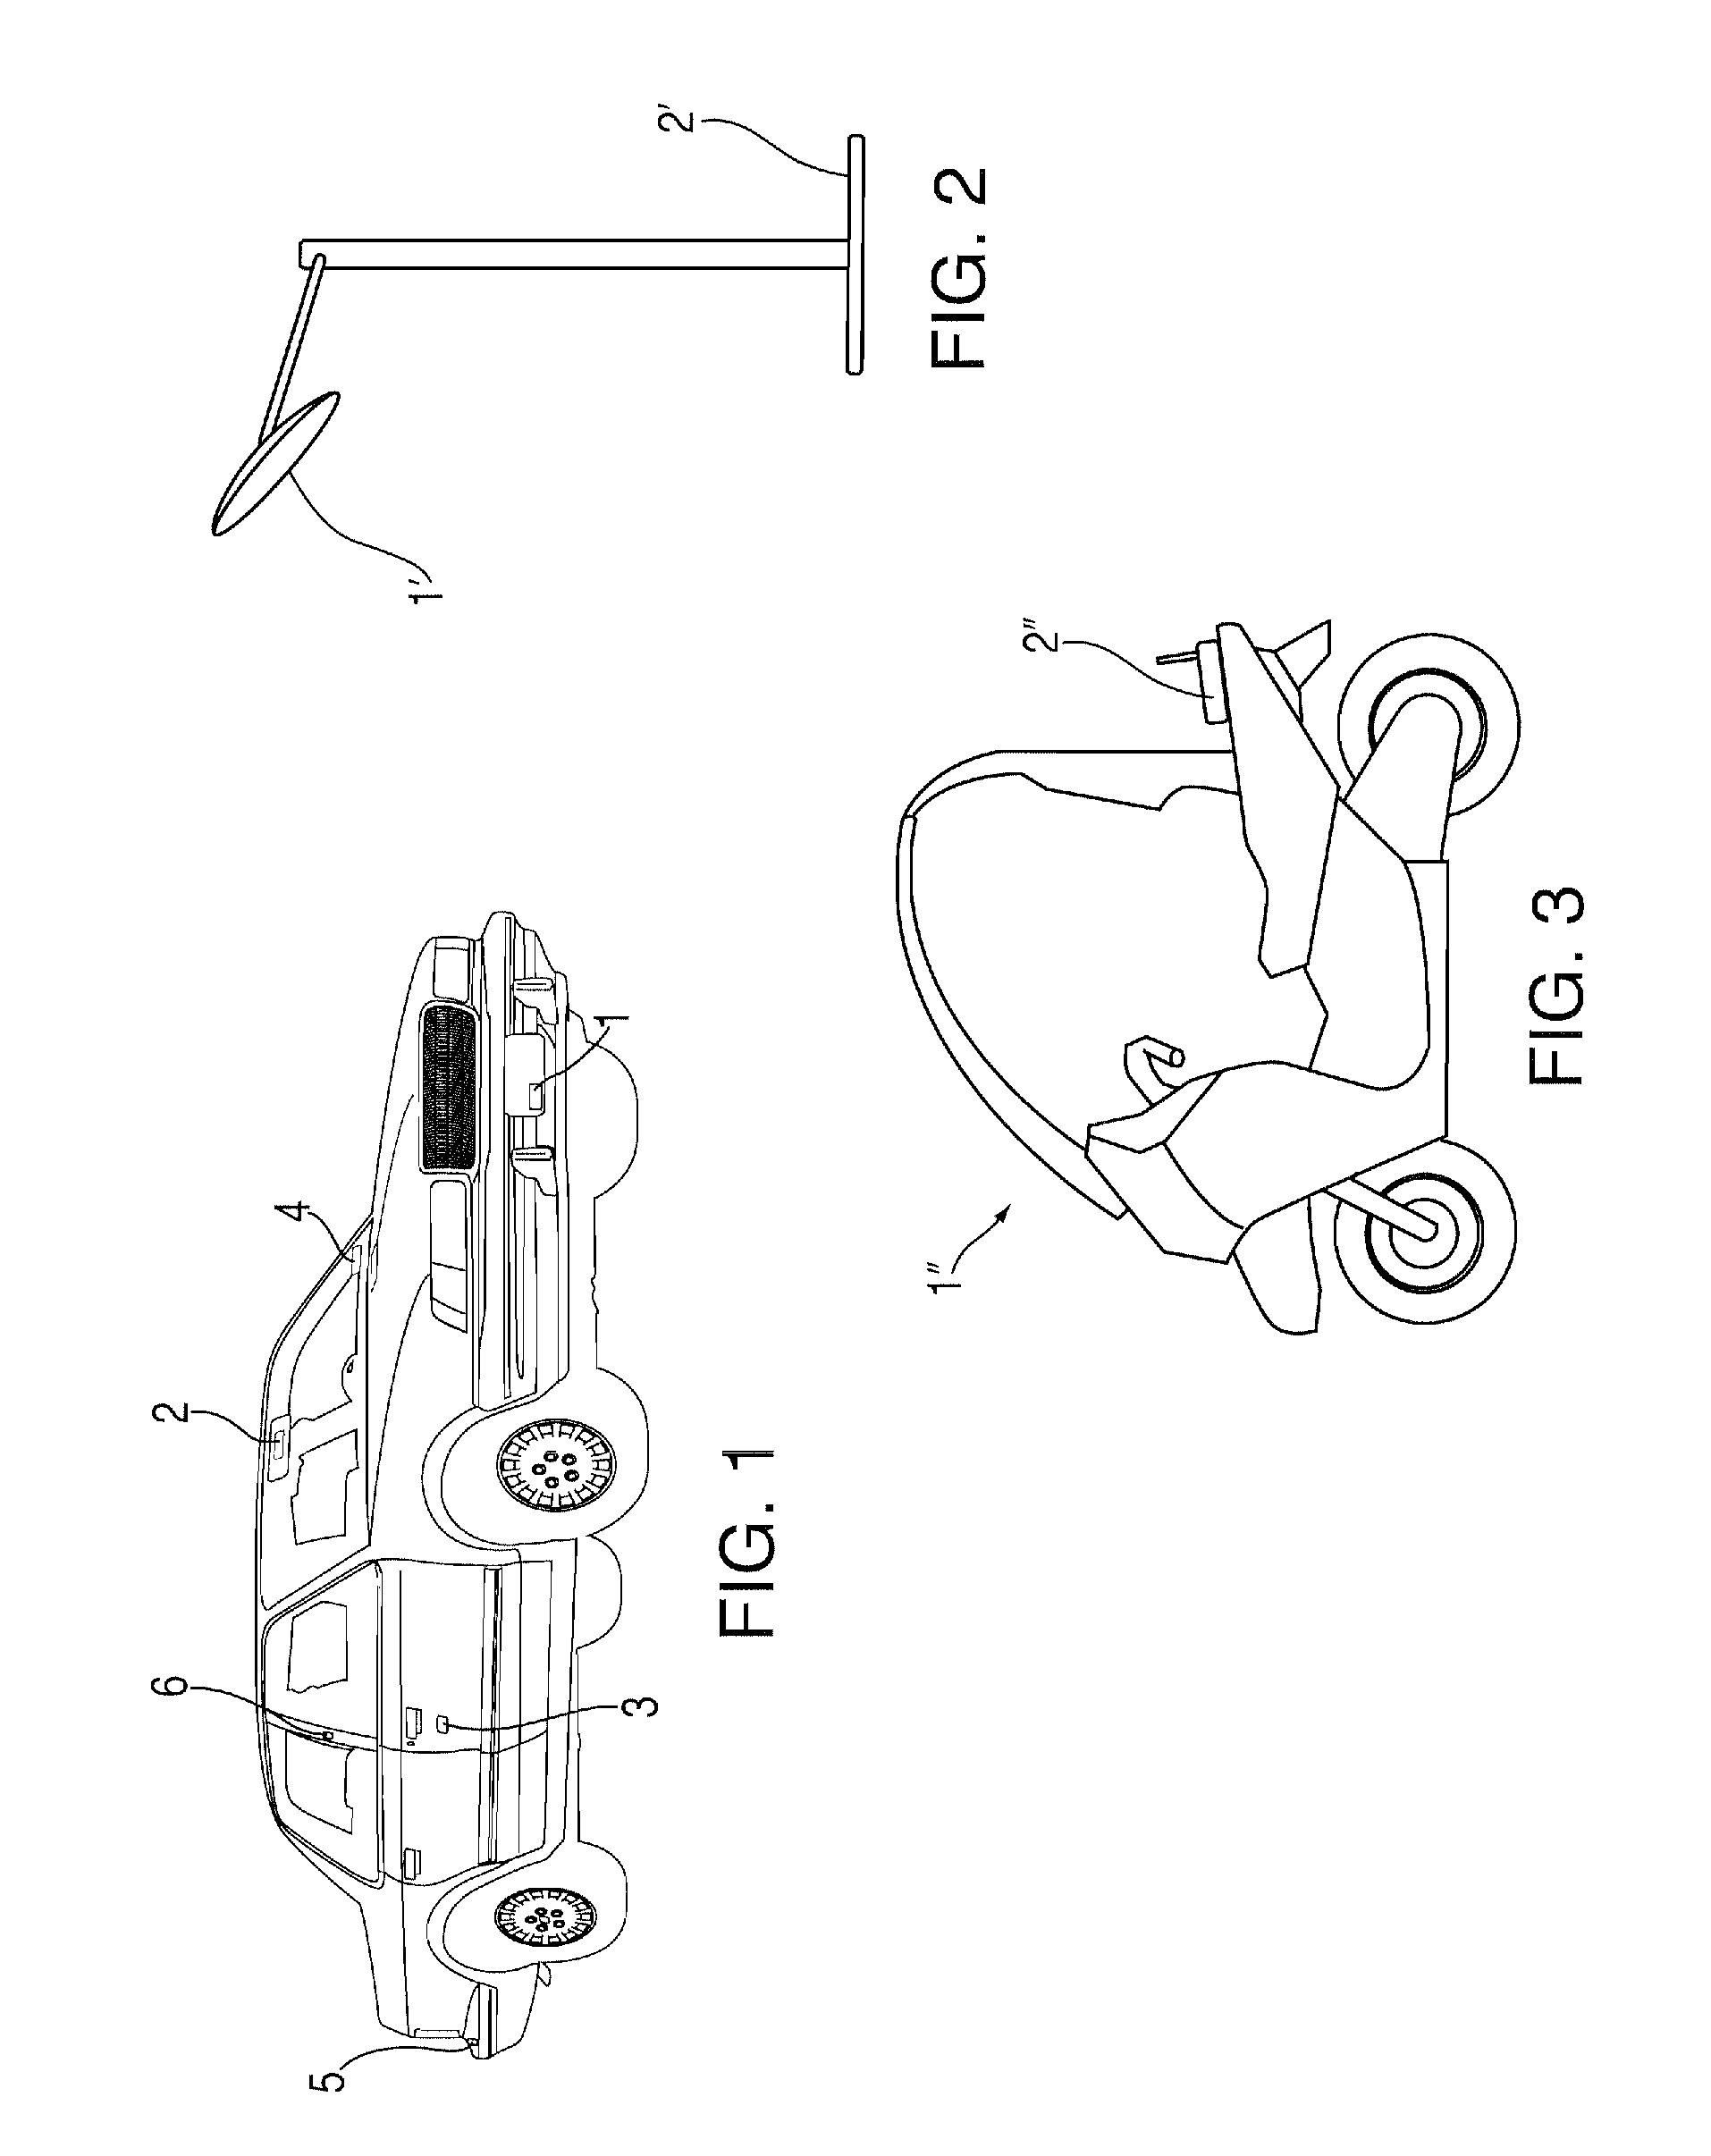 System and method for collecting vehicle road-use and parking fees and for monitoring vehicular regulatory compliance